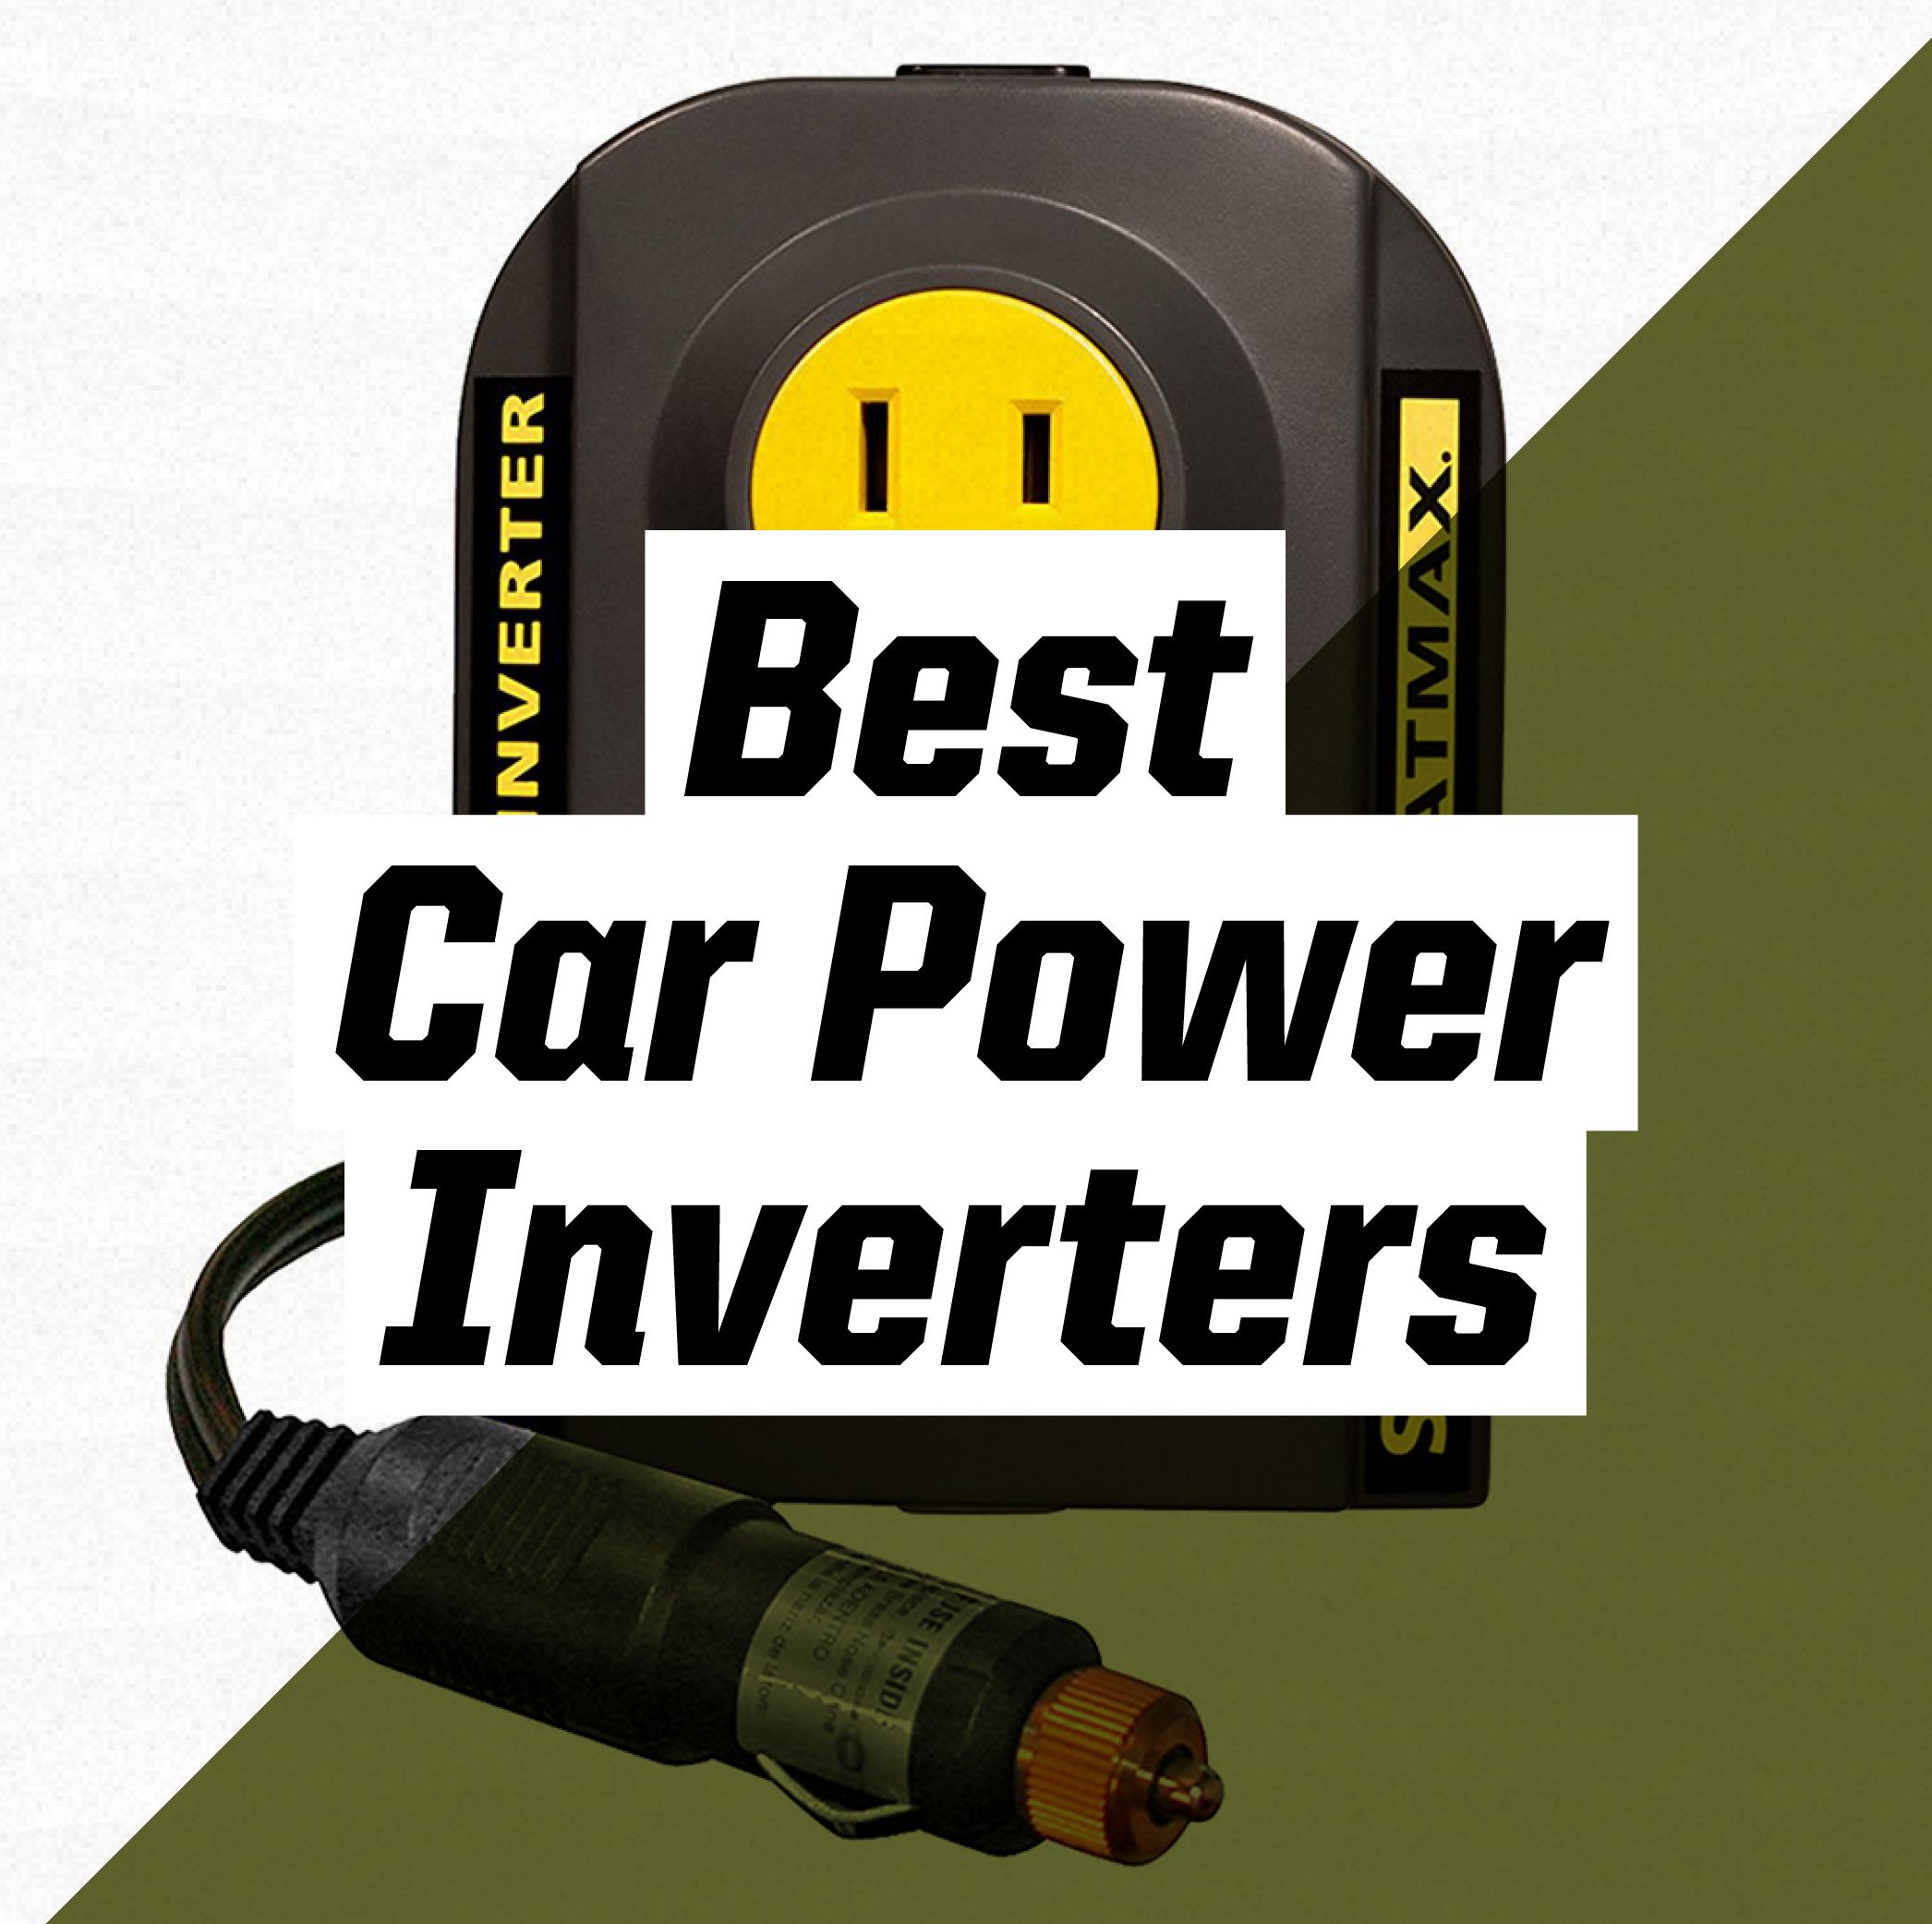 The Best Car Power Inverters to Keep Your Tech Running on the Road